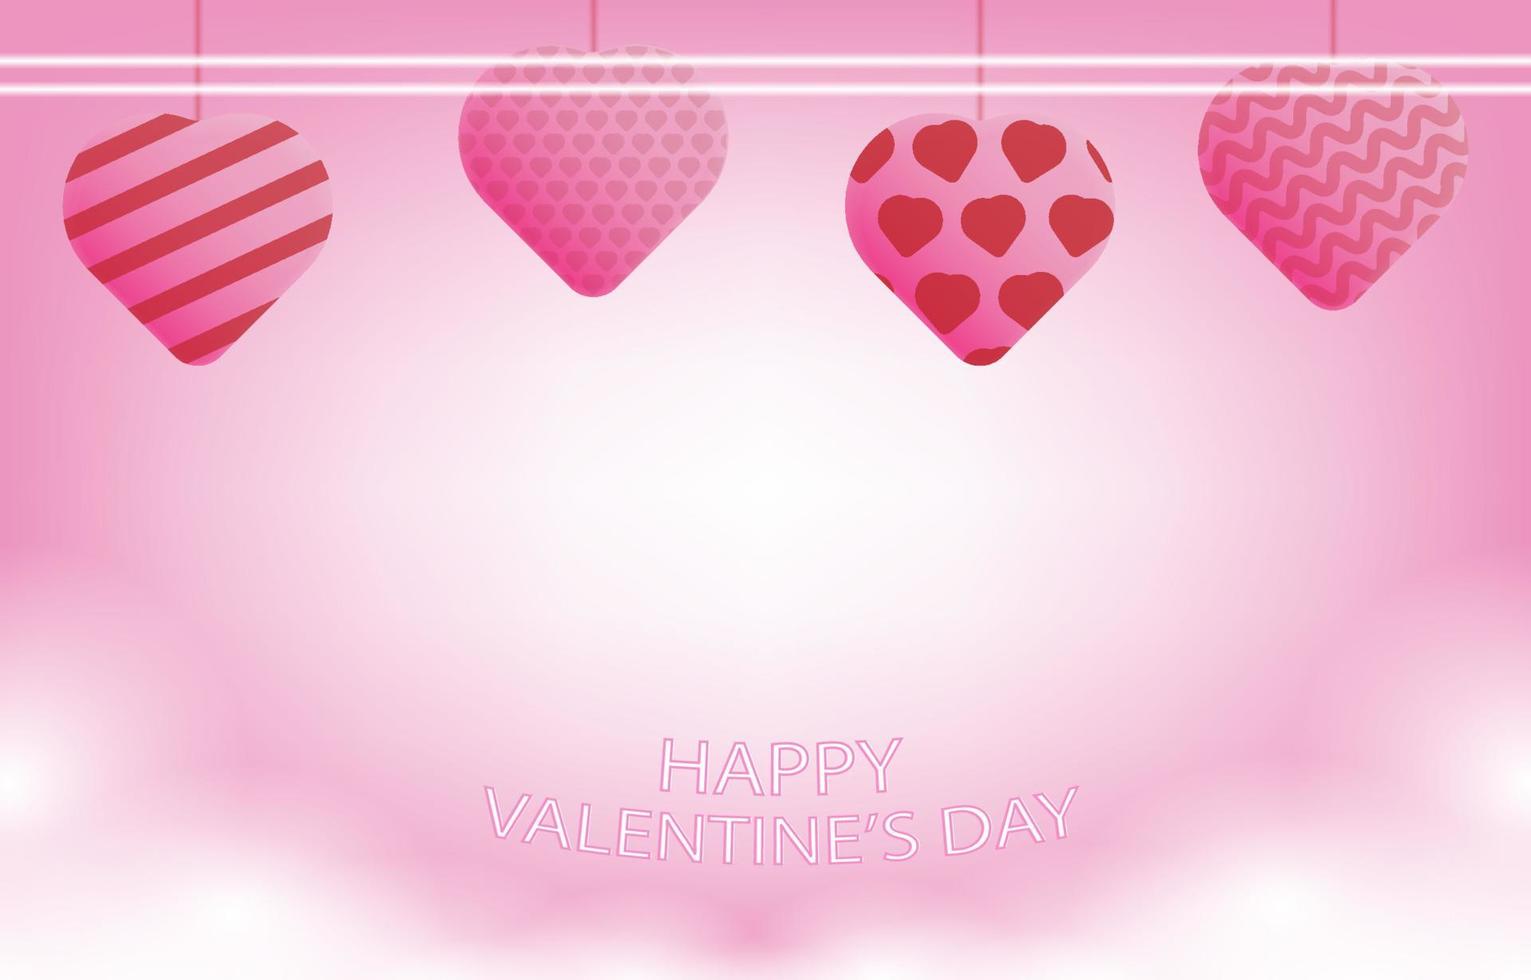 Happy Valentine's Day poster or banner with heart ballon on pink background. Design for promotion and shopping template. Background for Love and Valentine's day concept. vector